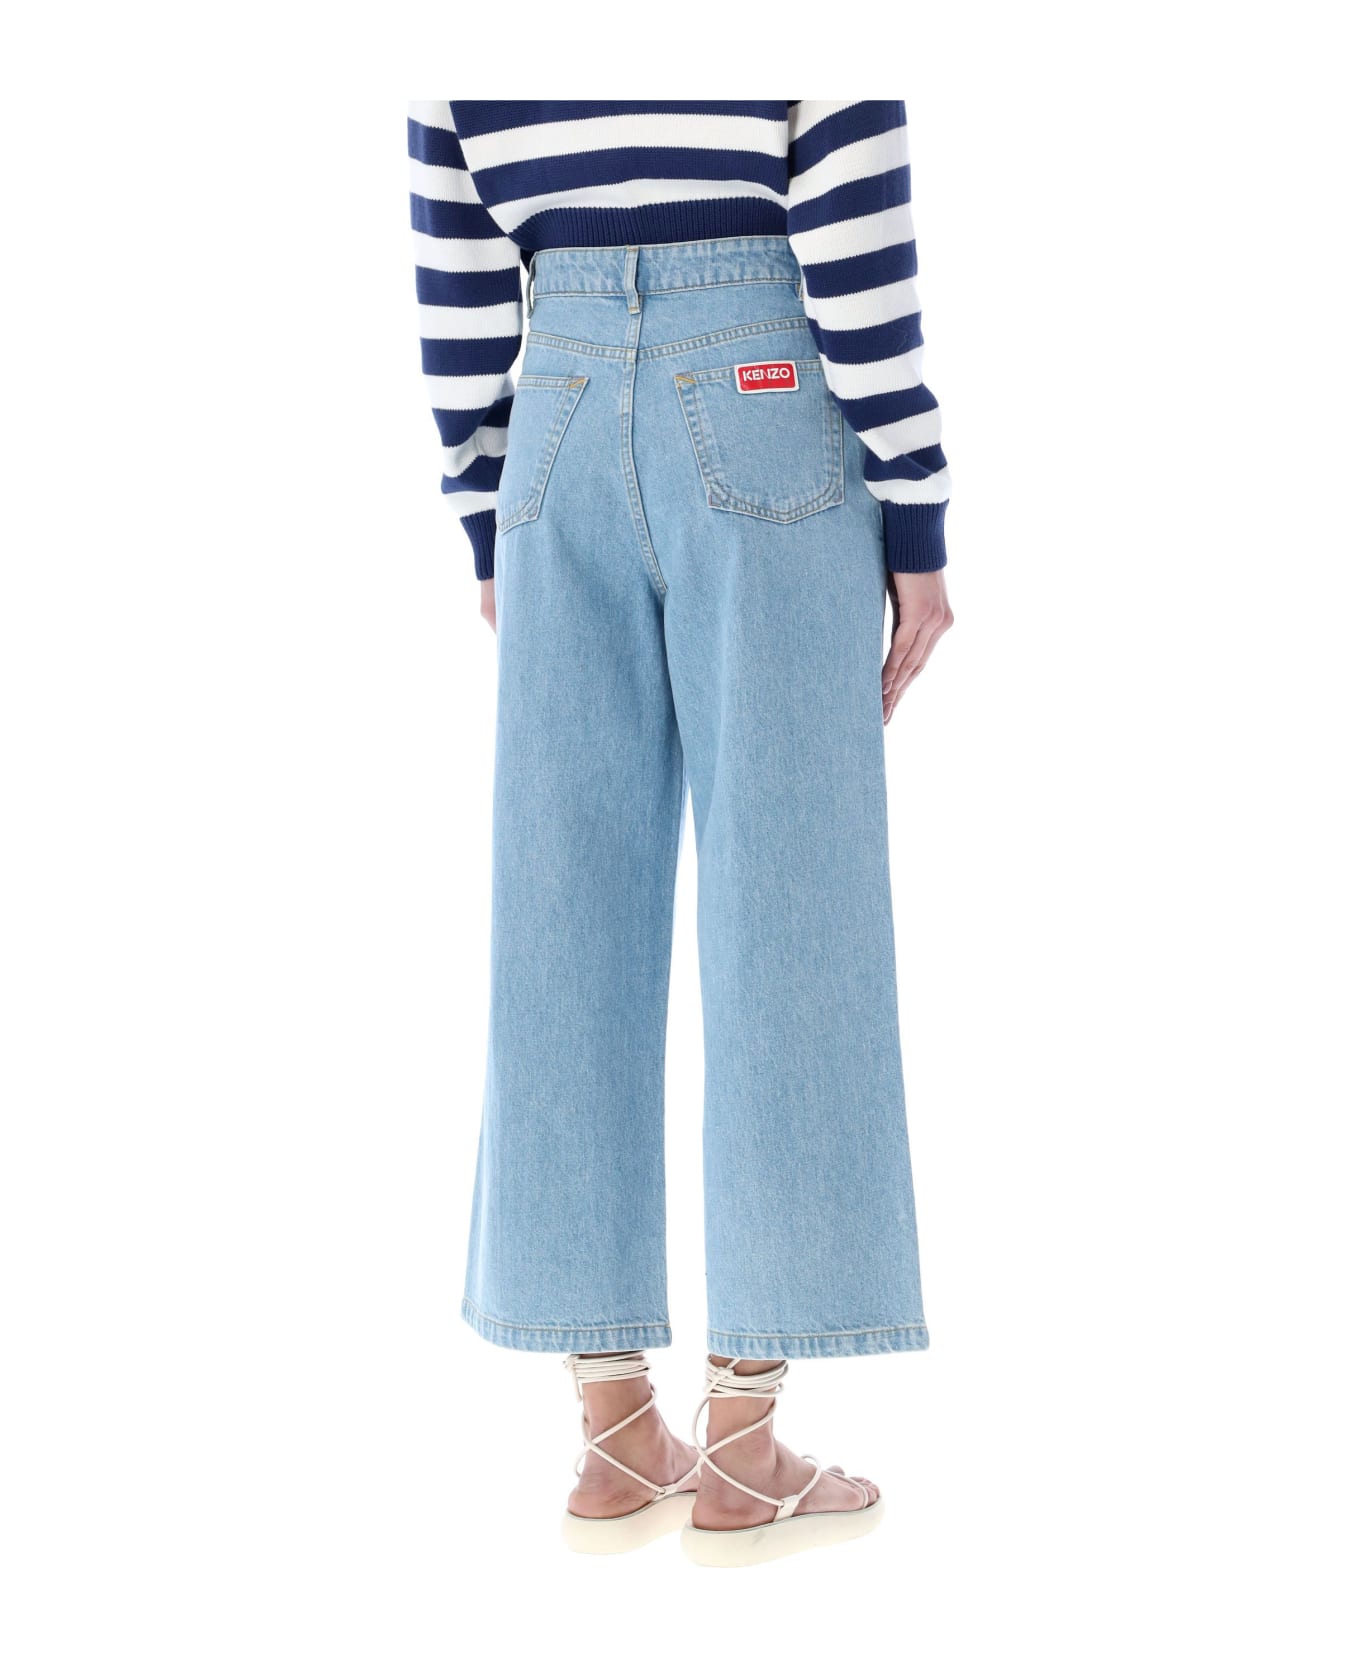 Kenzo Sumire Cropped Jeans - BLEACHED BLUE